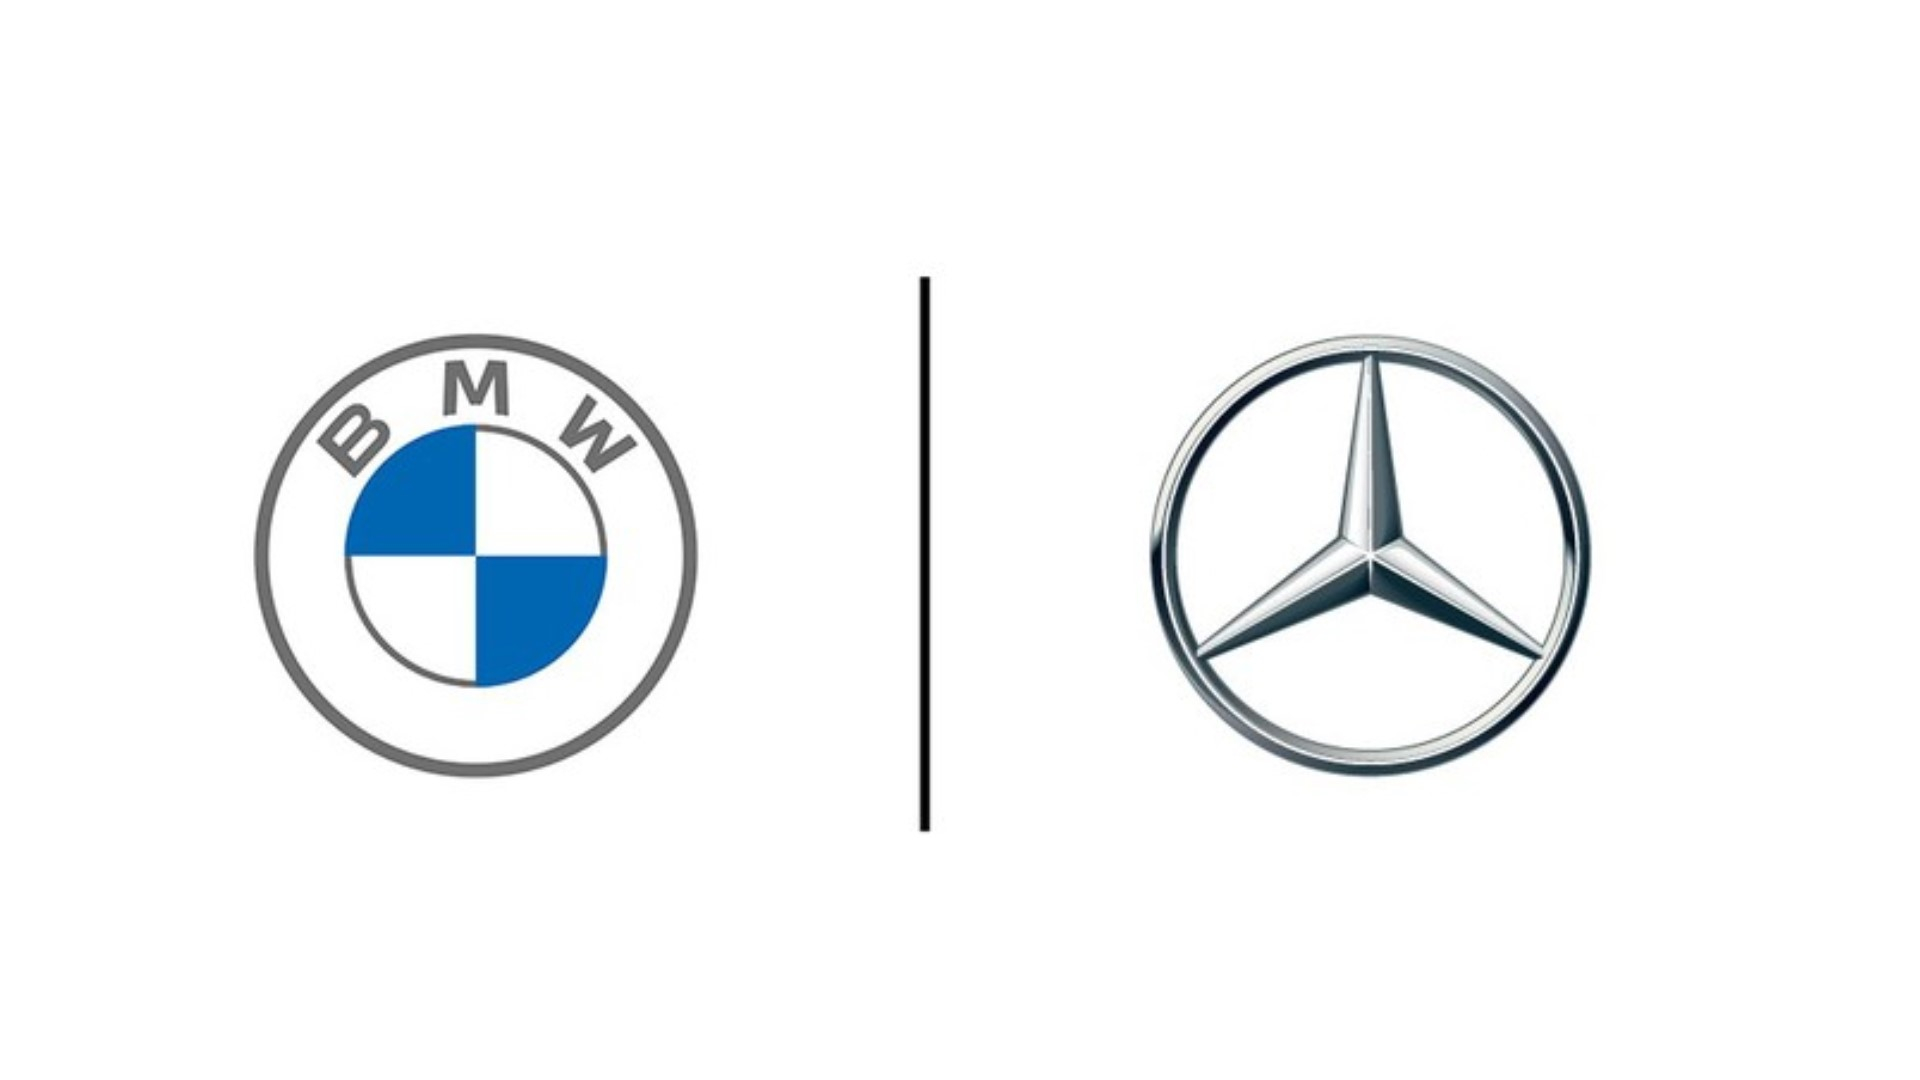 High Power Charging Network Initiative from Mercedes and BMW in China